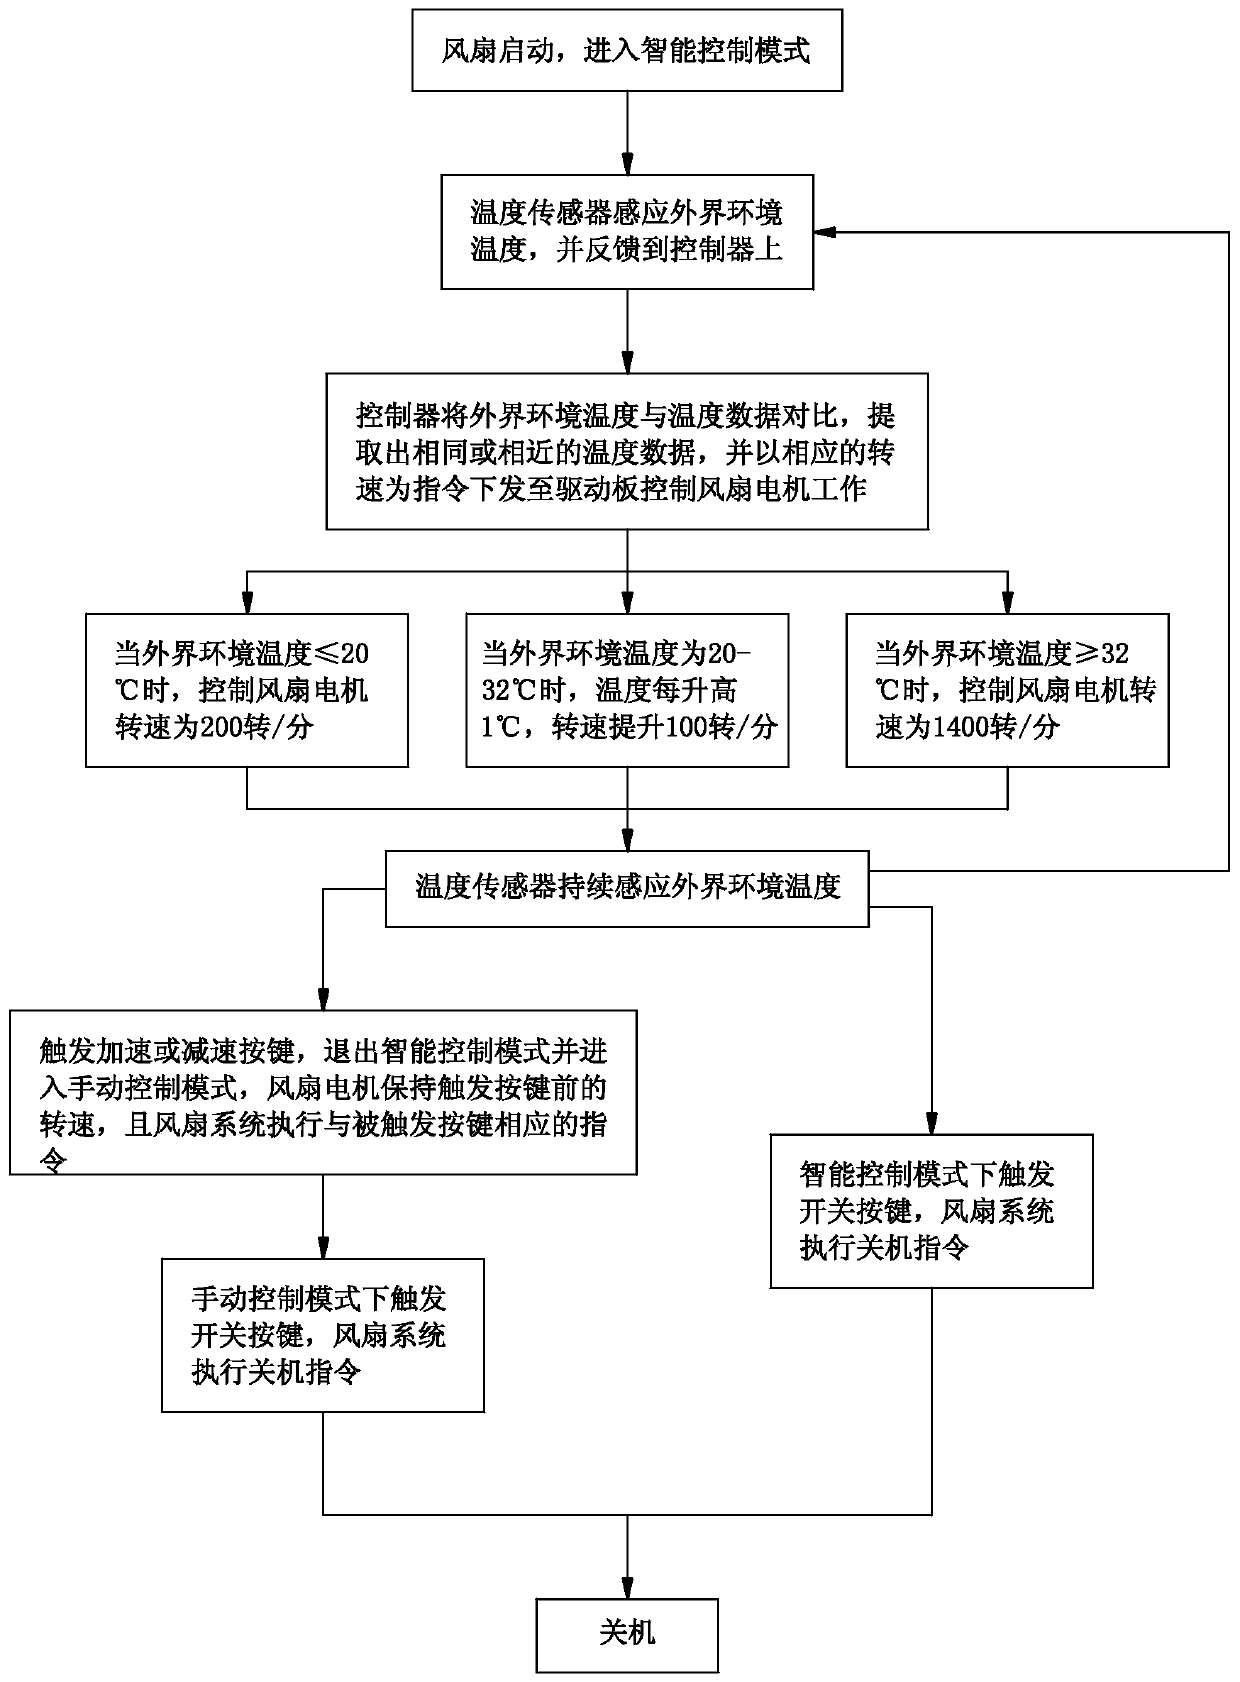 Fan temperature sensing and speed regulating method and industrial or commercial electric fan